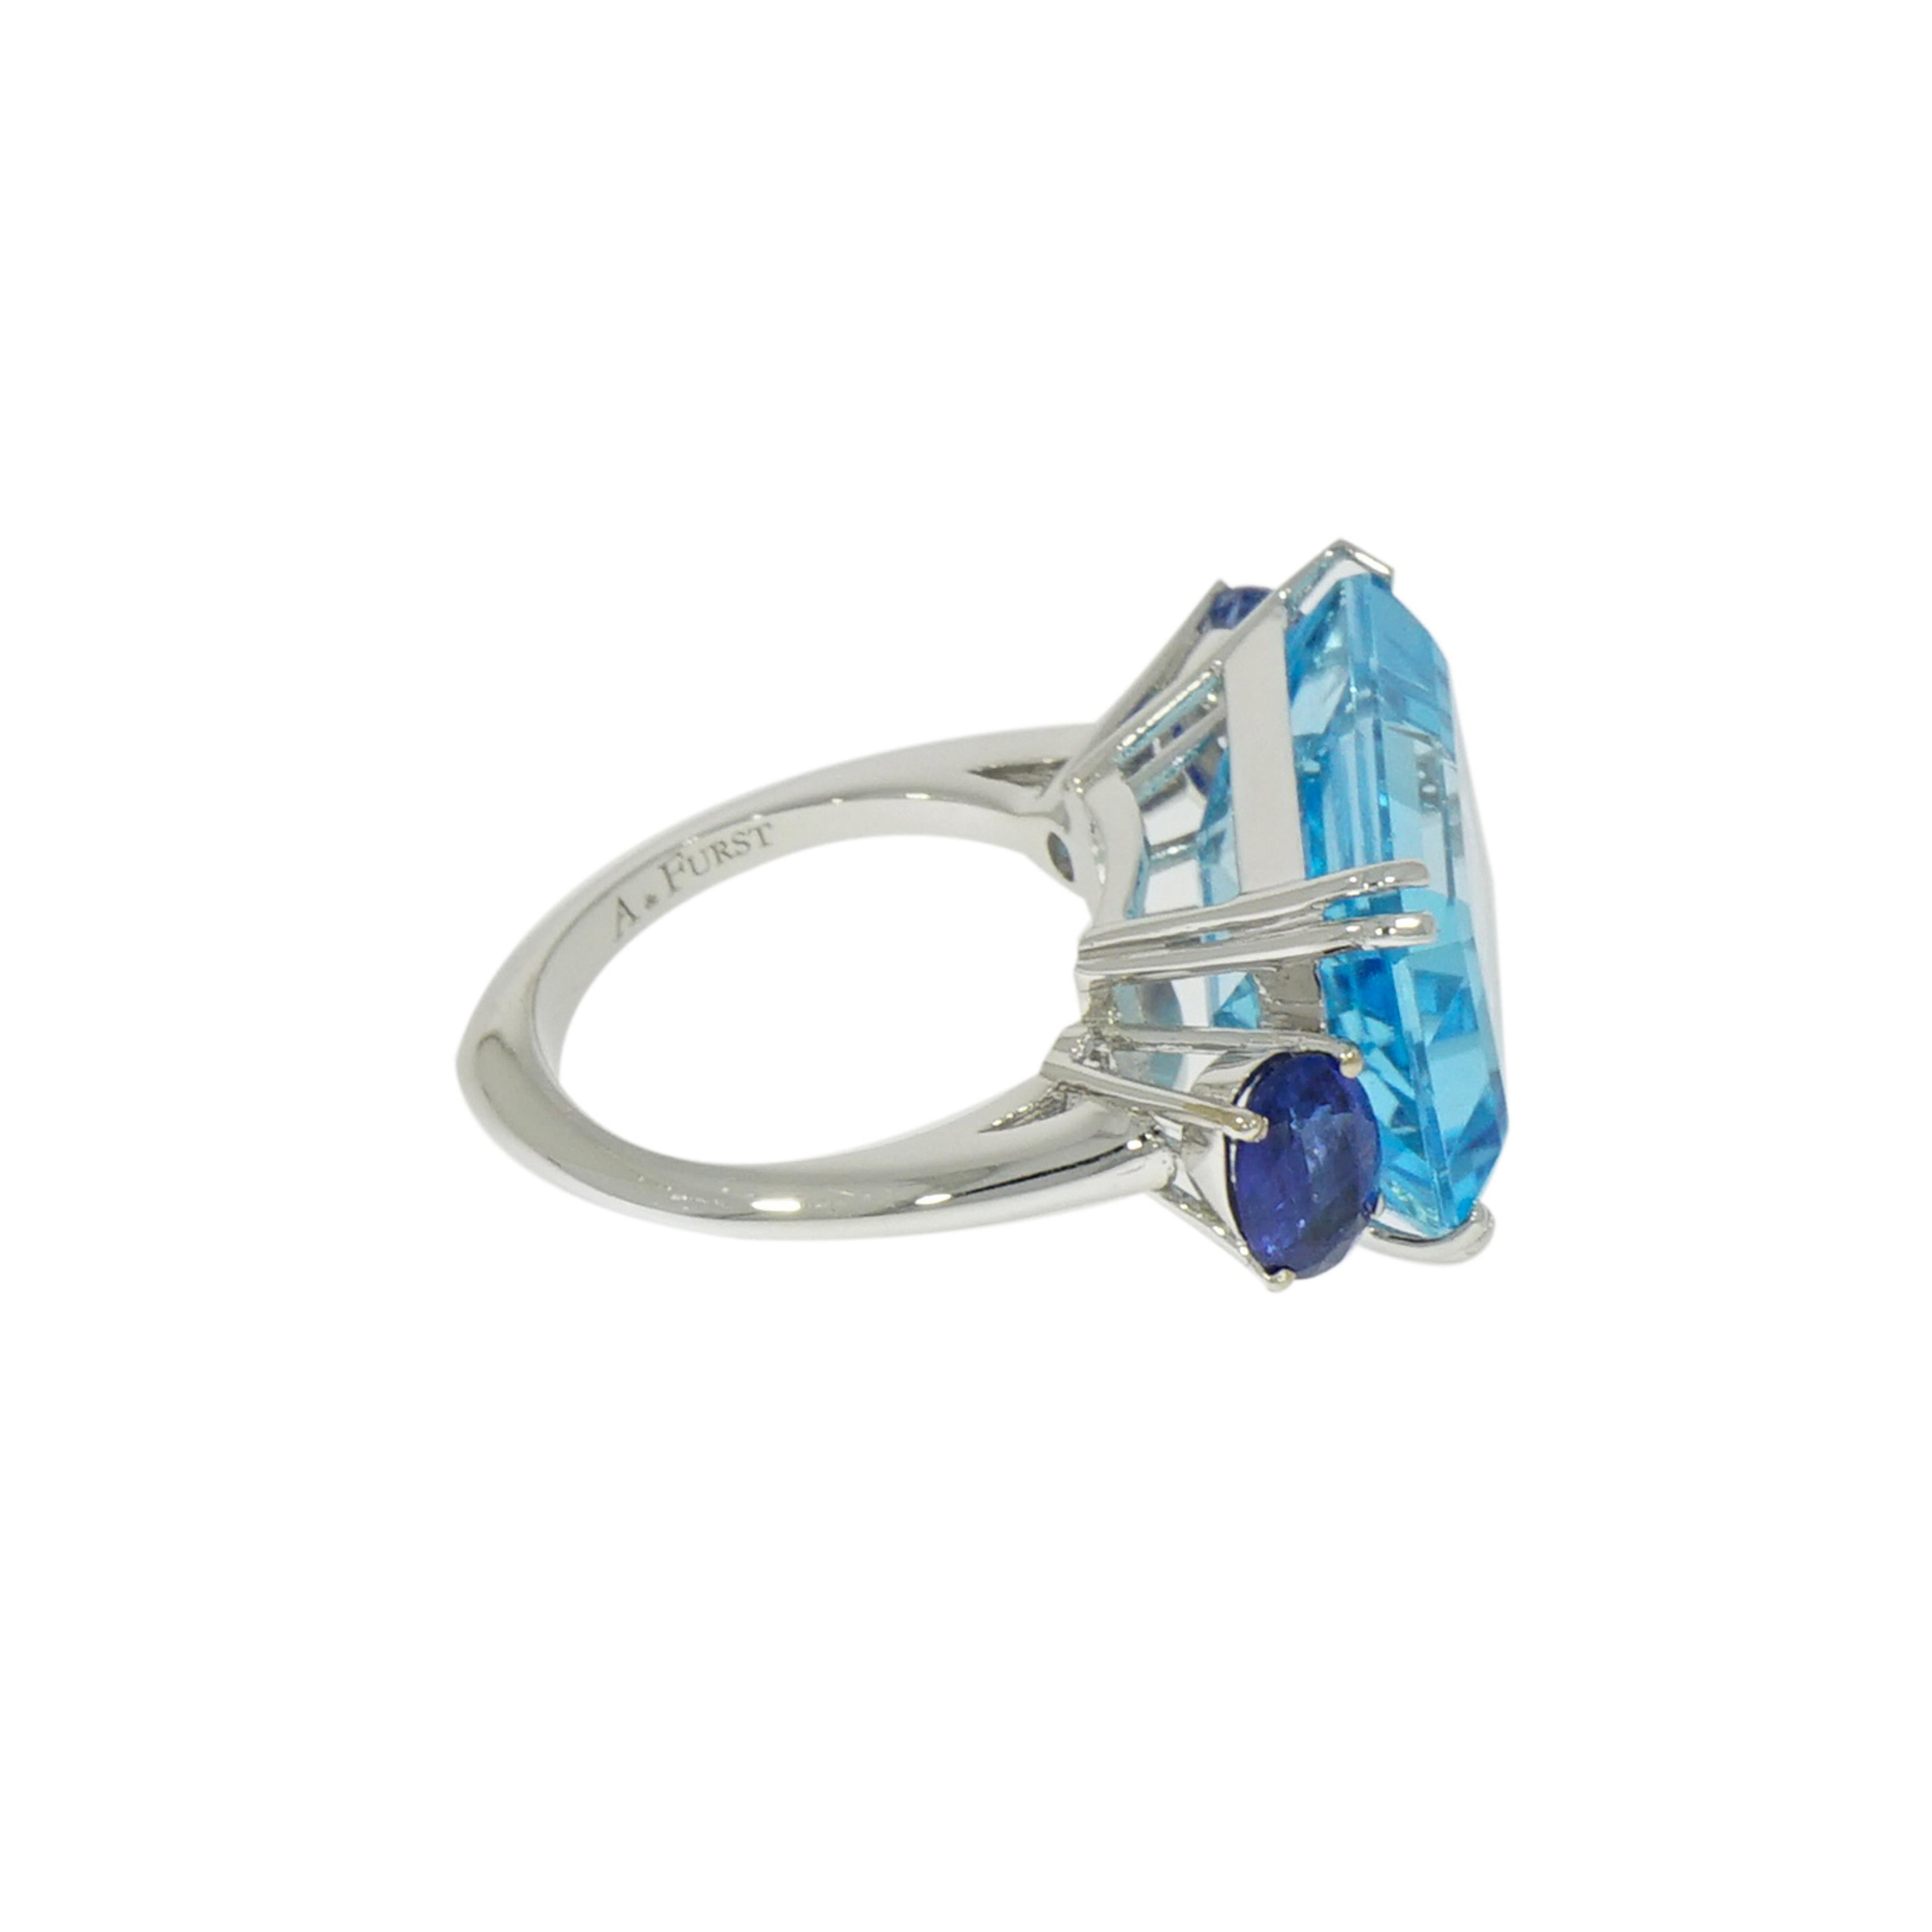 Dive into the clear blue hue of this beautiful cocktail ring... Inspired by the bright colors of summer and the essential lines of modern architecture, translated into the bold emerald cut center stone with oval accent.  
This Blue Topaz and Kyanite